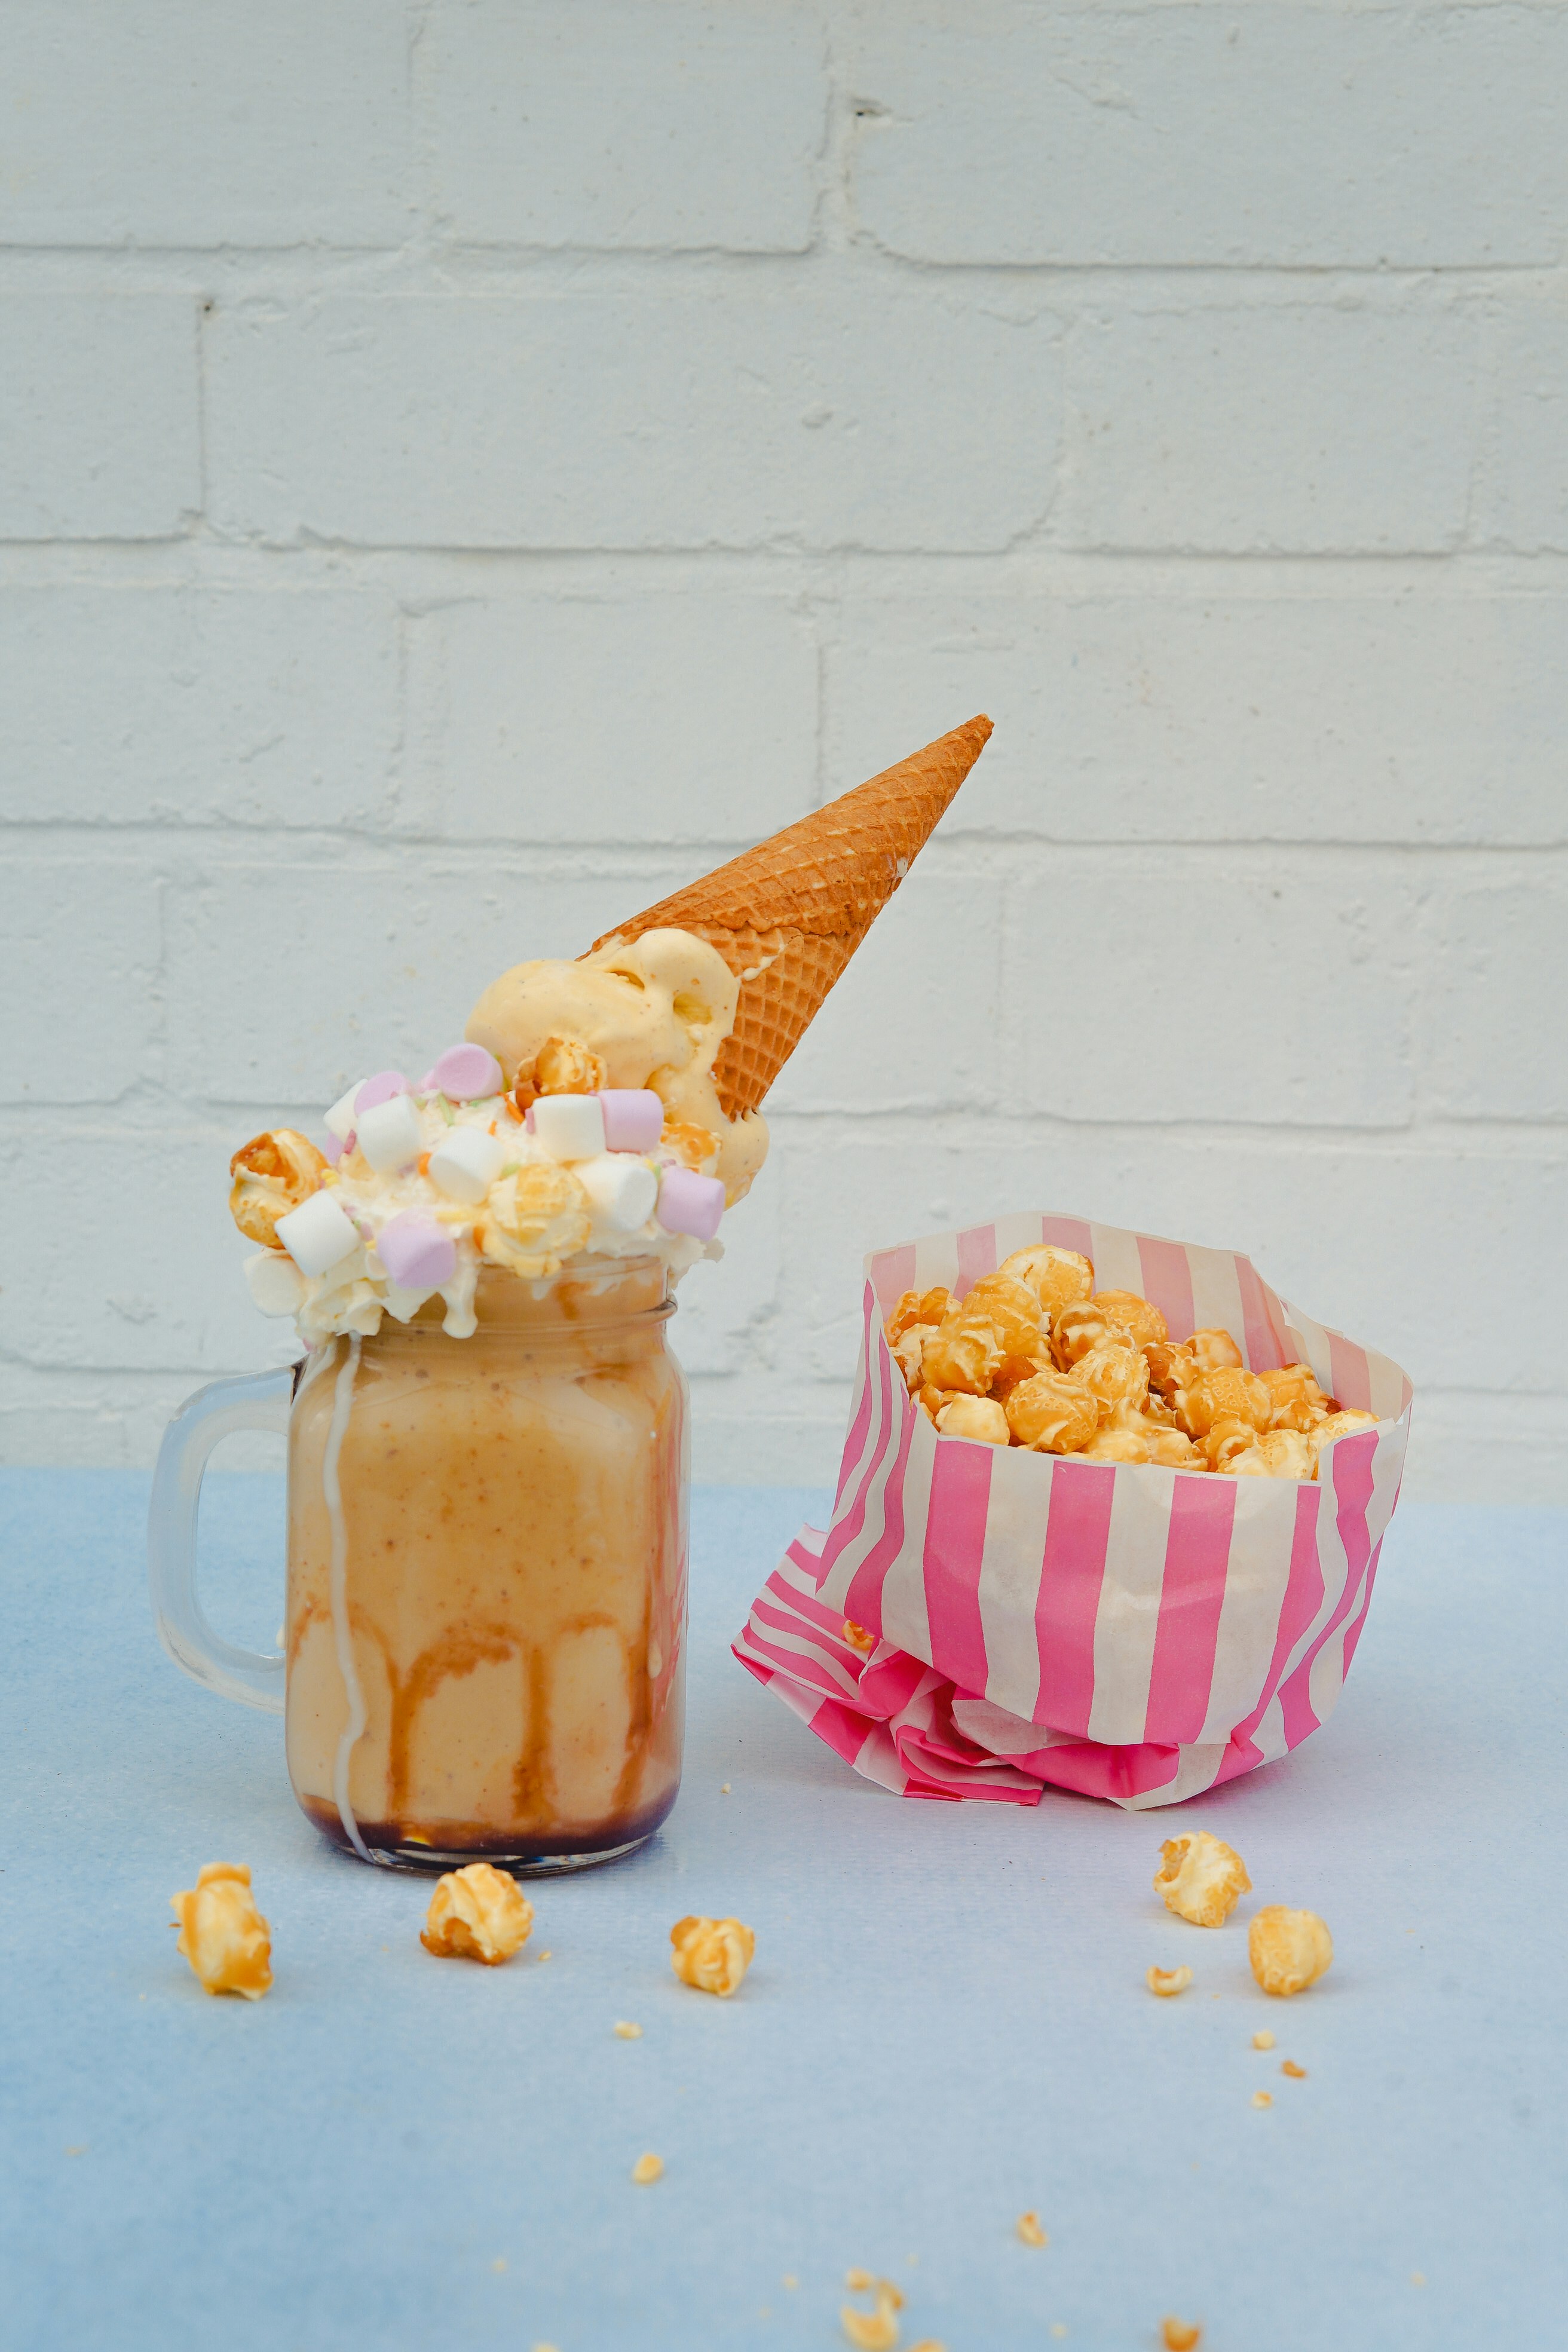 ice cream in a jar with marshmallow and cone and a pack of popcorn